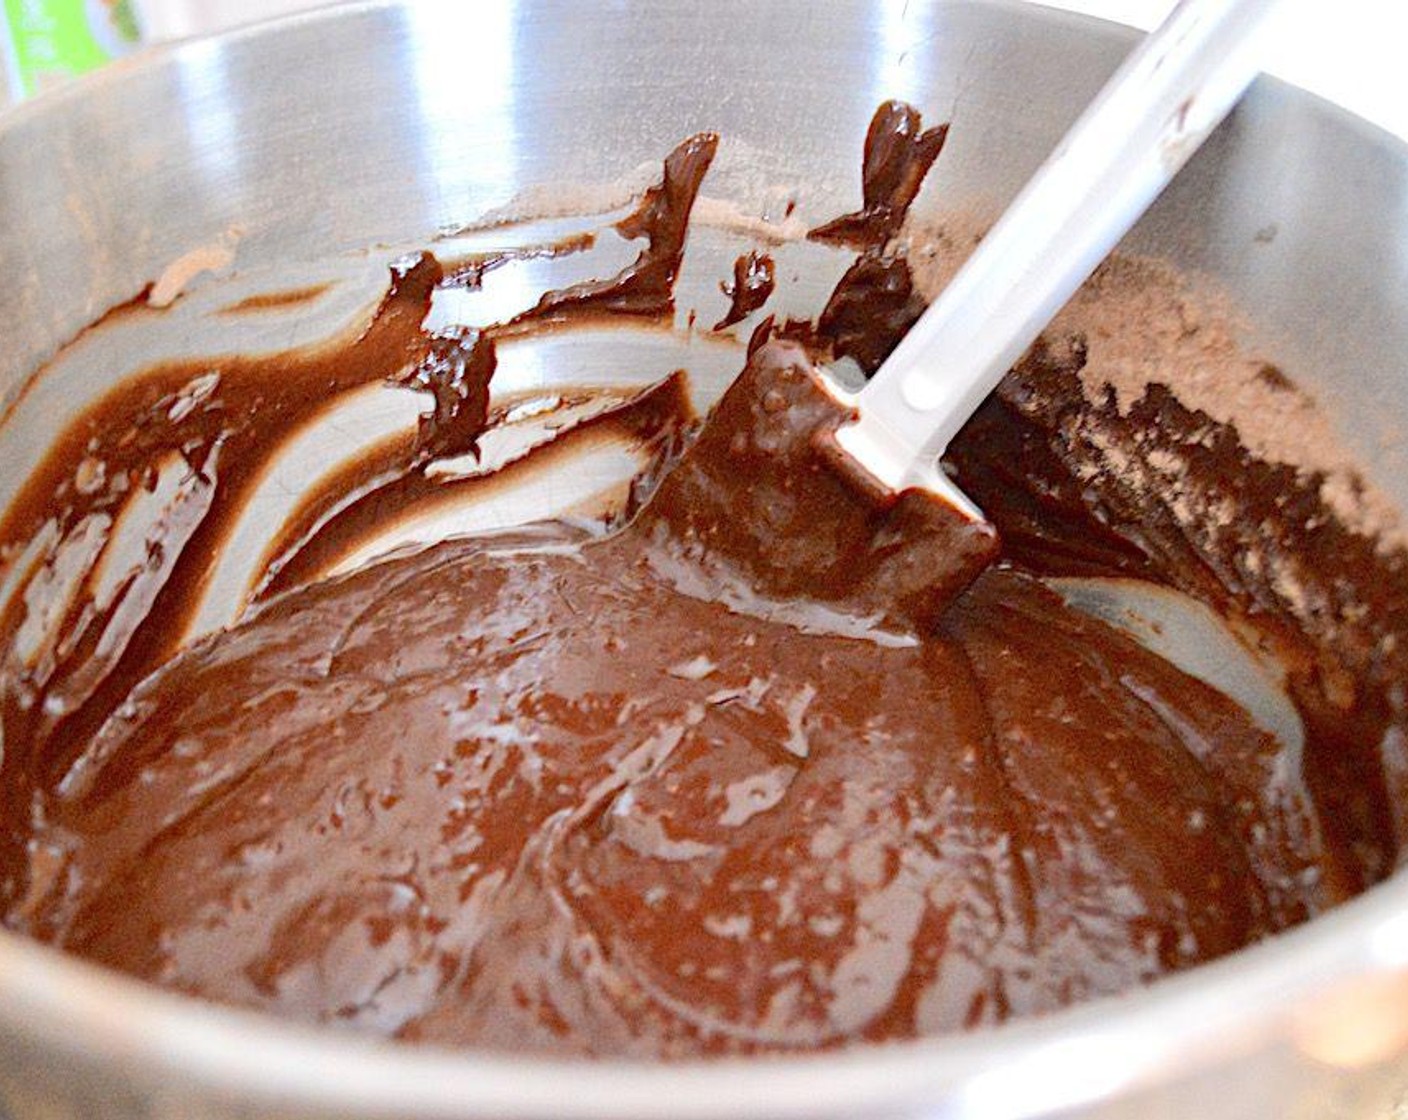 step 4 Combine the Semi-Sweet Baking Chocolate (1 1/3 cups), Fig Jam (3/4 cup), Butter (1/3 cup), and Milk (1 Tbsp) in a heatproof bowl and place it over the simmering water to form a double boiler. Let it melt and become shiny, stirring it with a heatproof spatula or spoon. Take it off the heat when it all smooth and melted and let it cool for a few minutes.